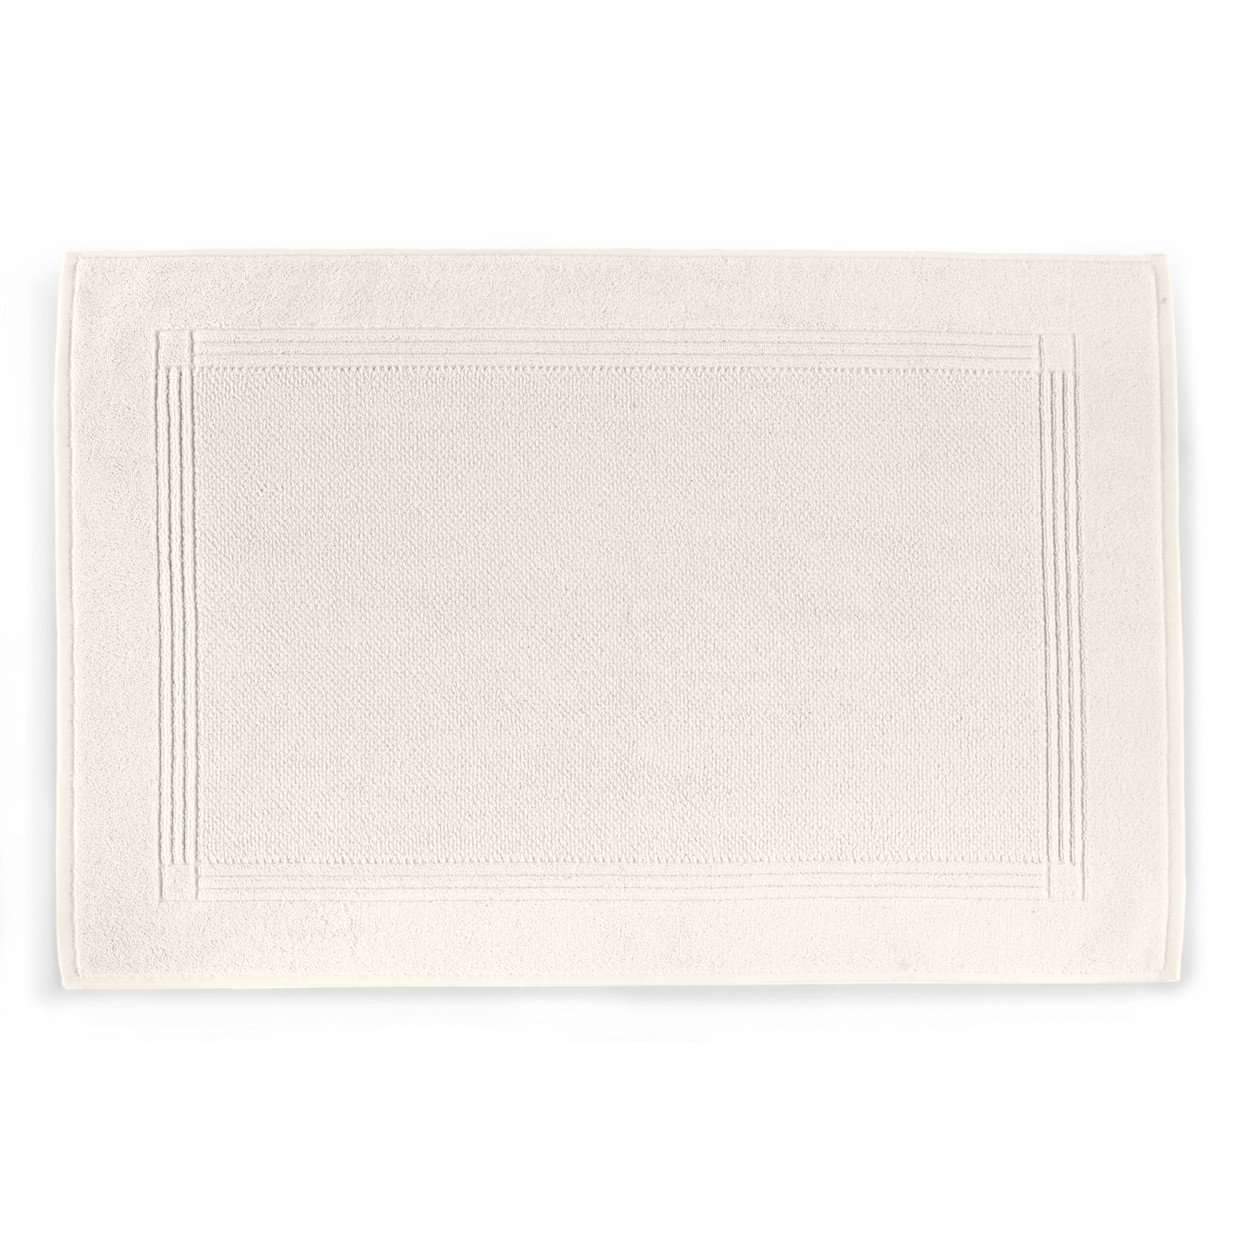 Towels Jubilee Bath Collection by Peacock Alley Mat 22x34 / Ivory Peacock Alley